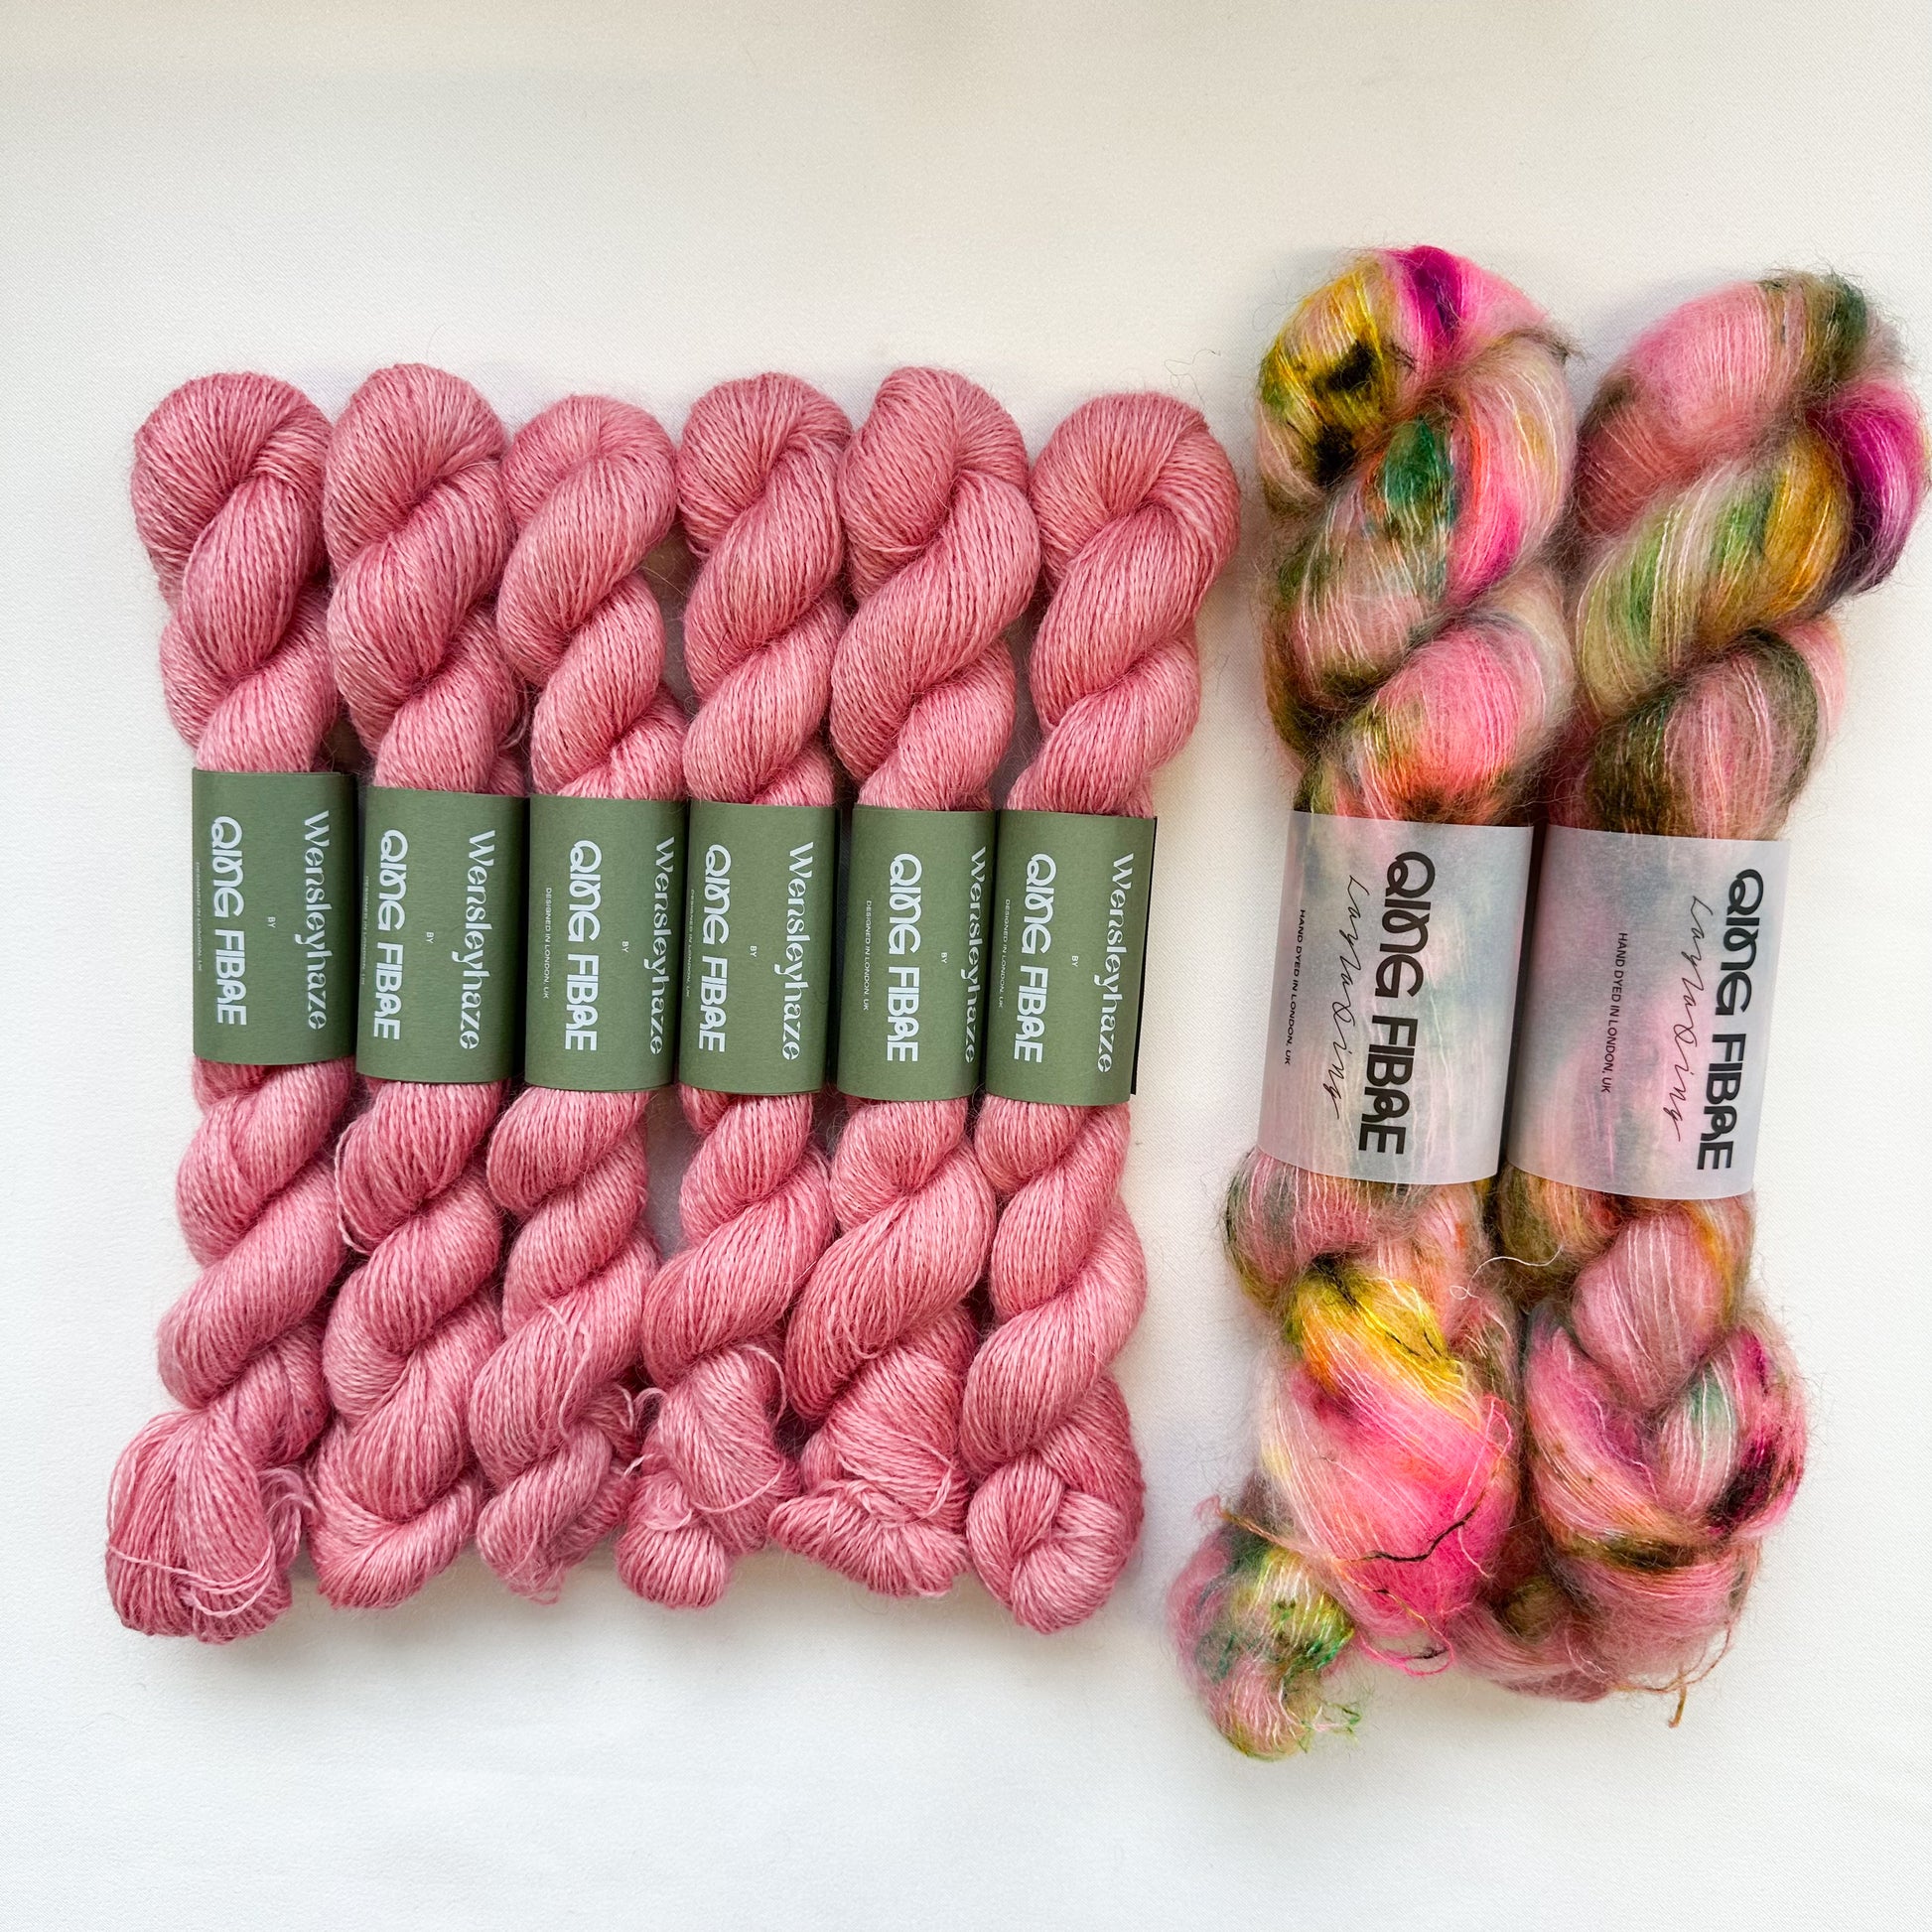 Speckled Hand Dyed Yarn in Sport Weight for Rose Cardigan, Indie